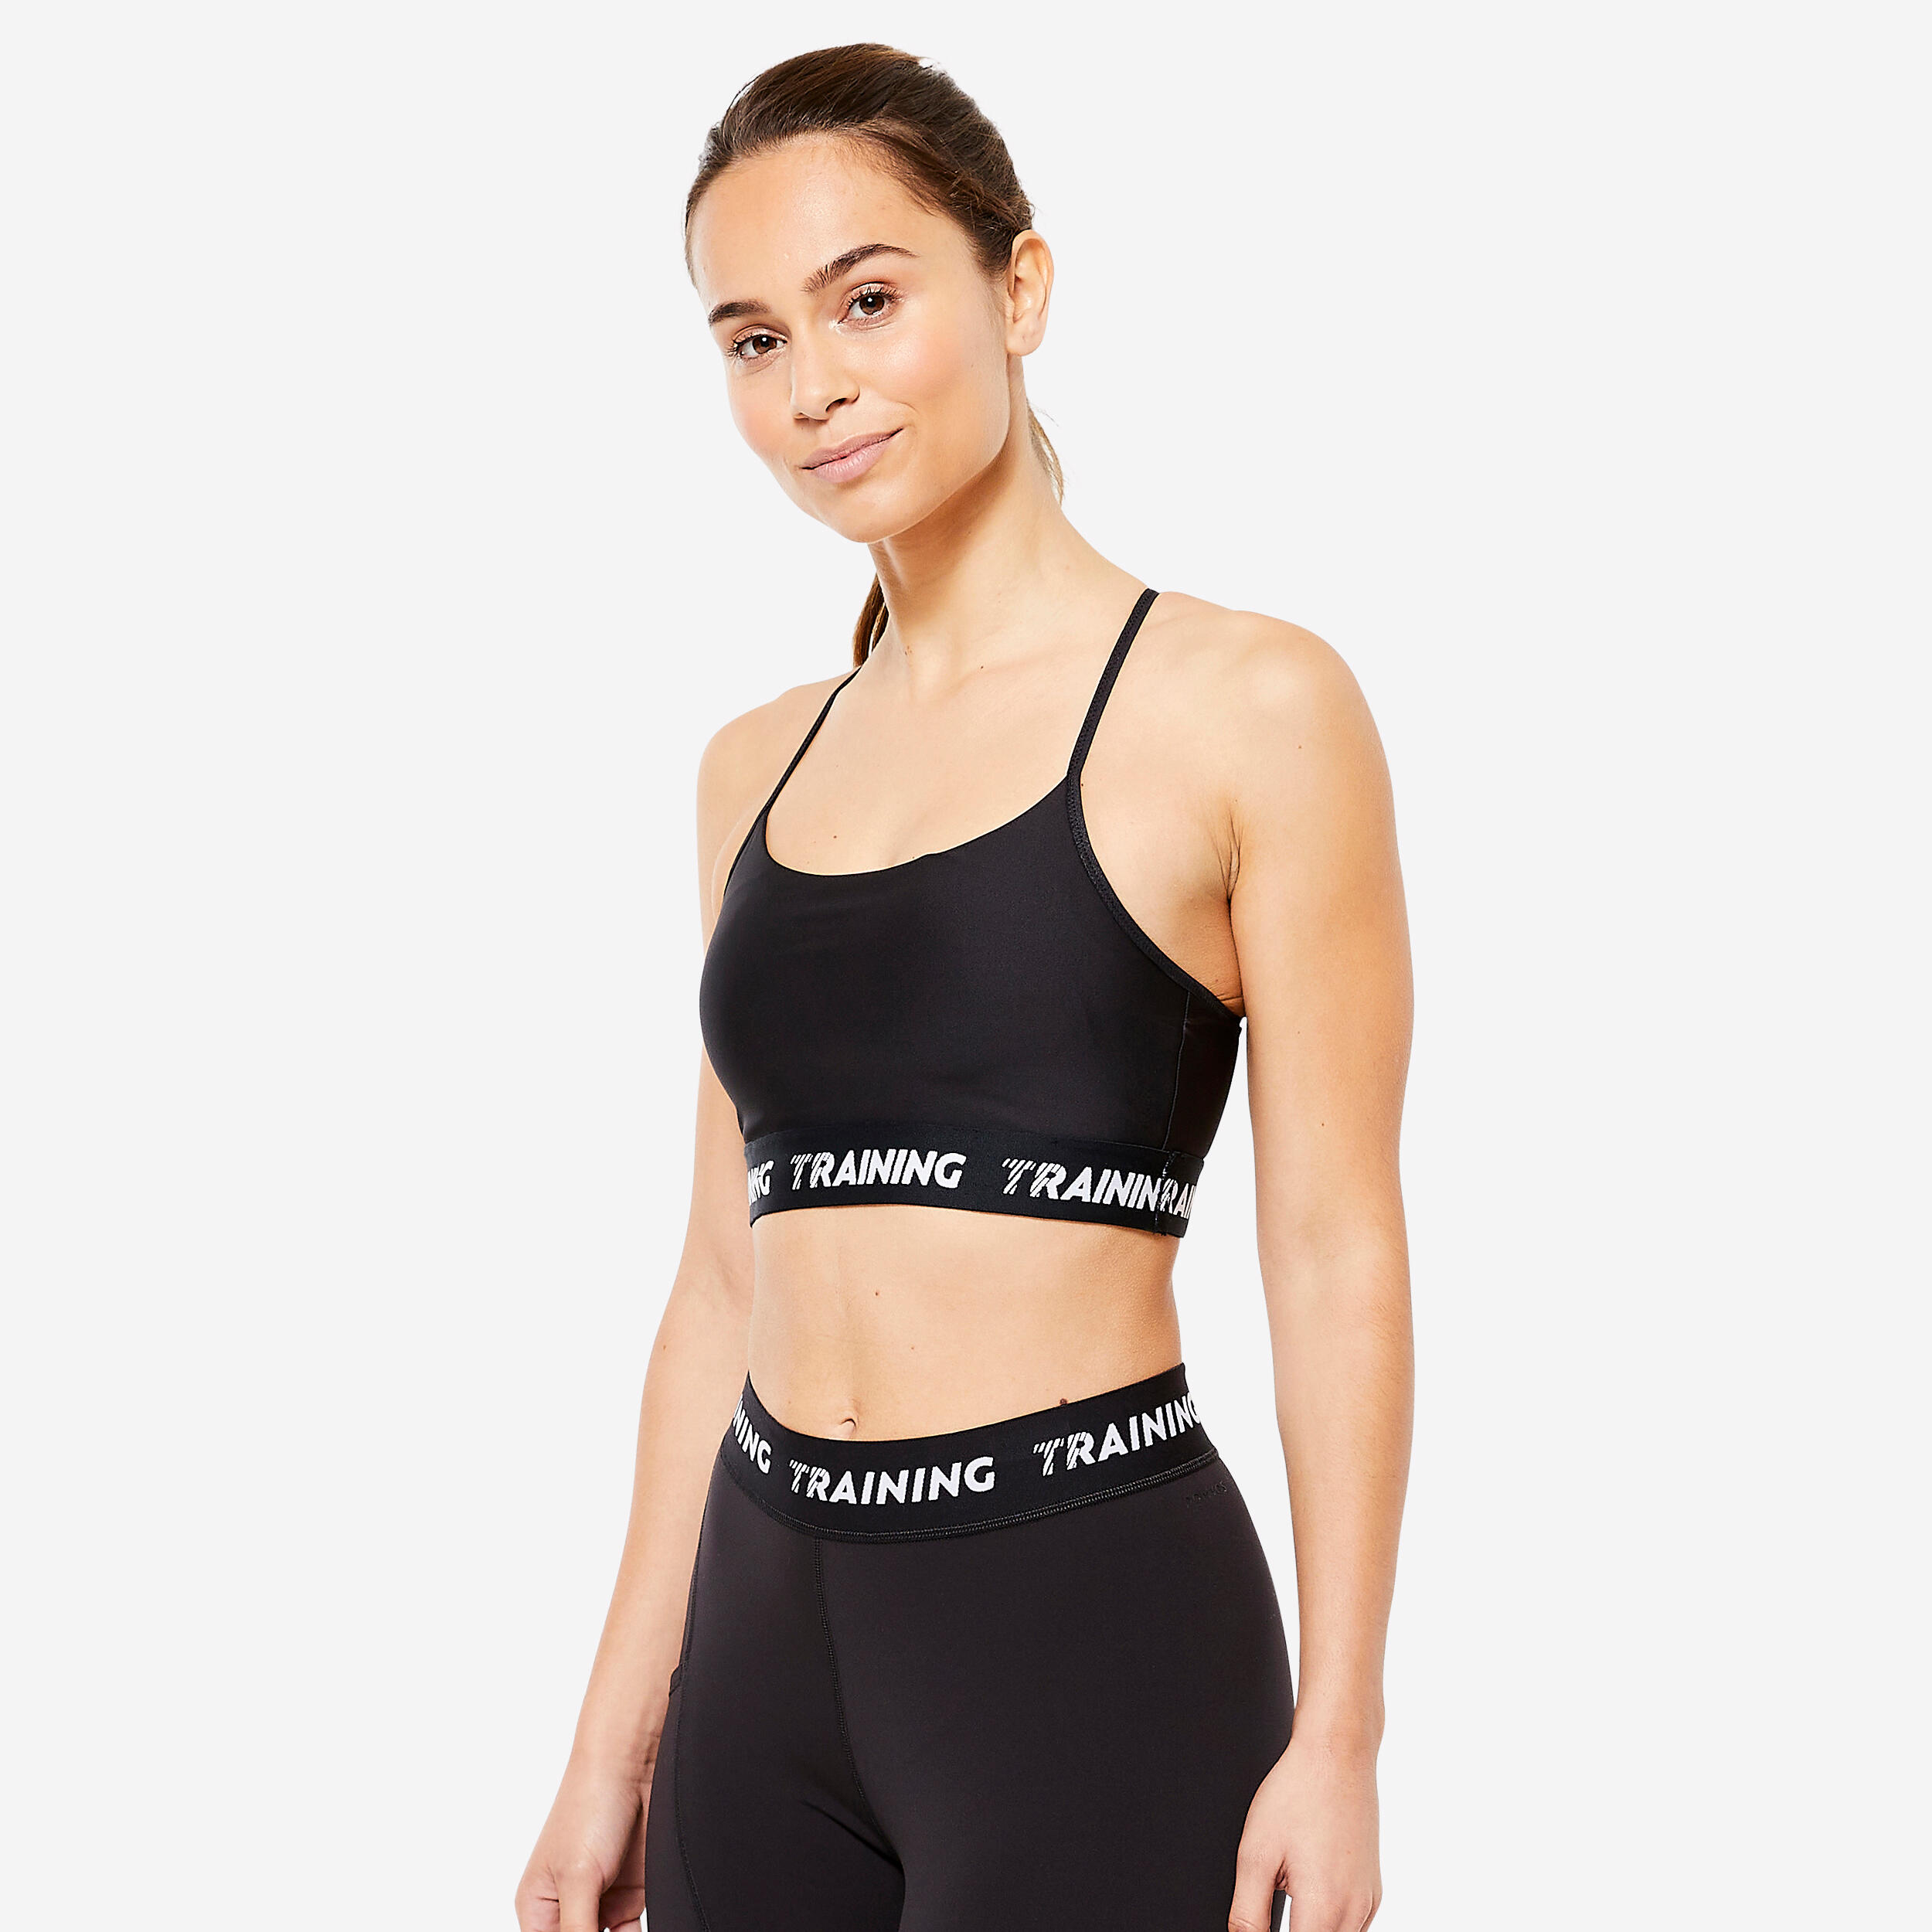 Women's Sports Bra with Thin Cross-Over Straps - Black 1/5